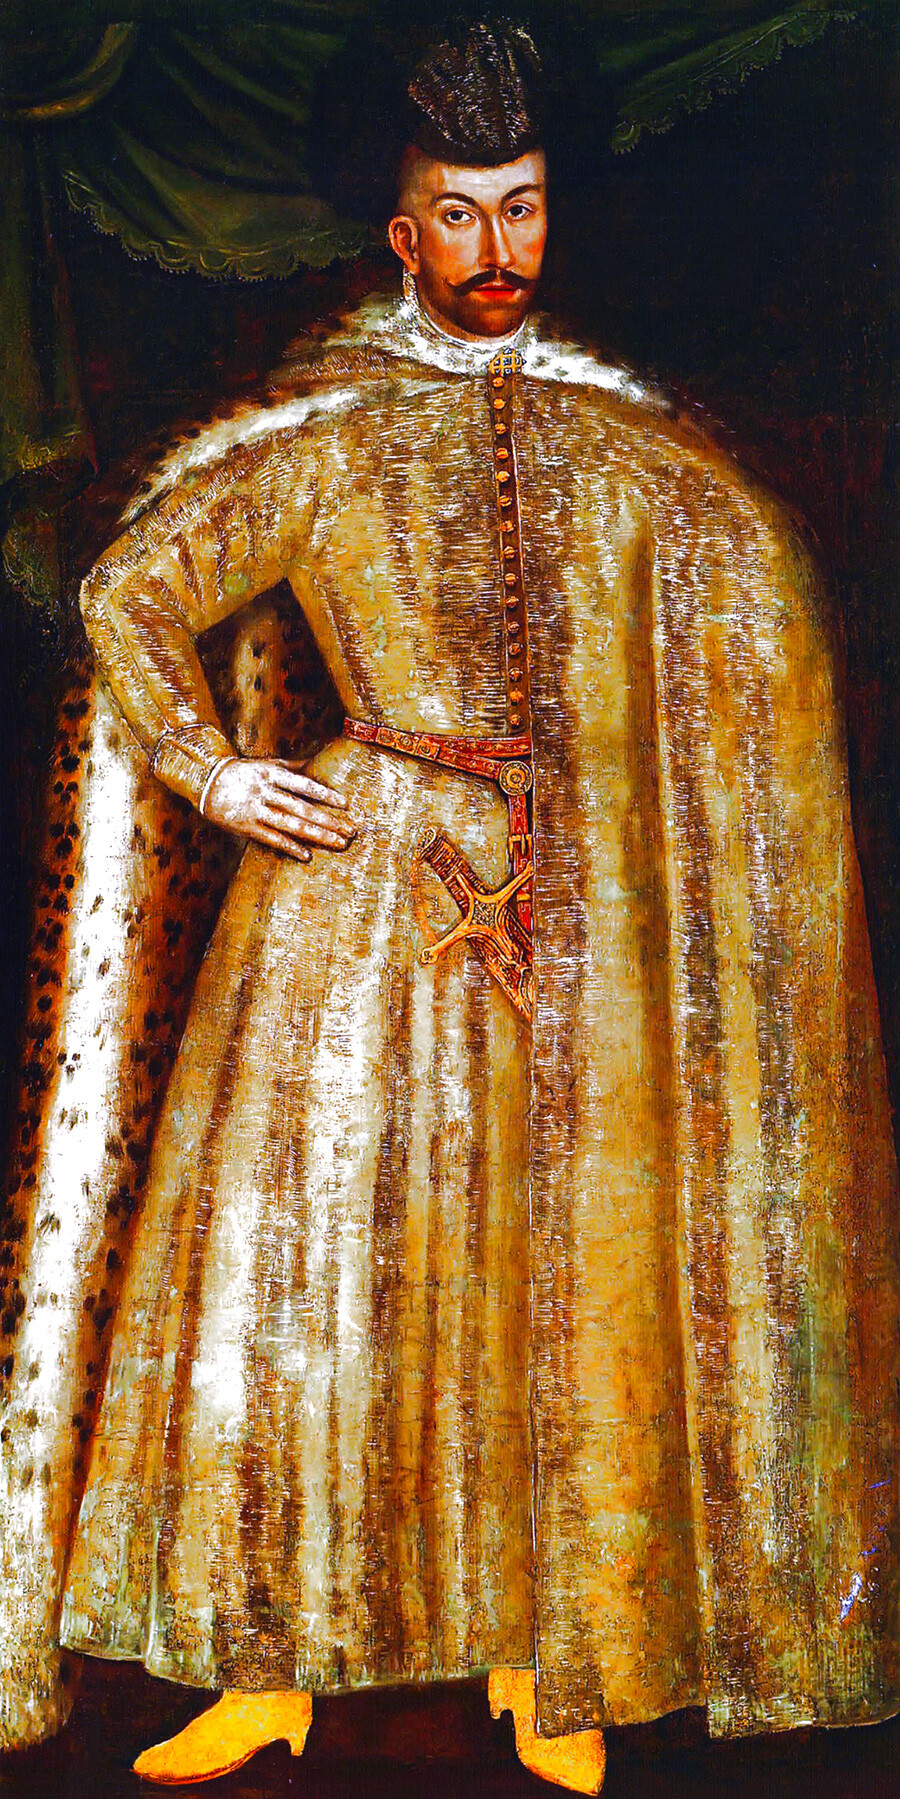 Simeon Bekbulatovich by unknown painter, second half of the 16th century. Simeon Bekbulatovich, the nephew of the tsar's second wife, was accordingly the tsar's nephew.